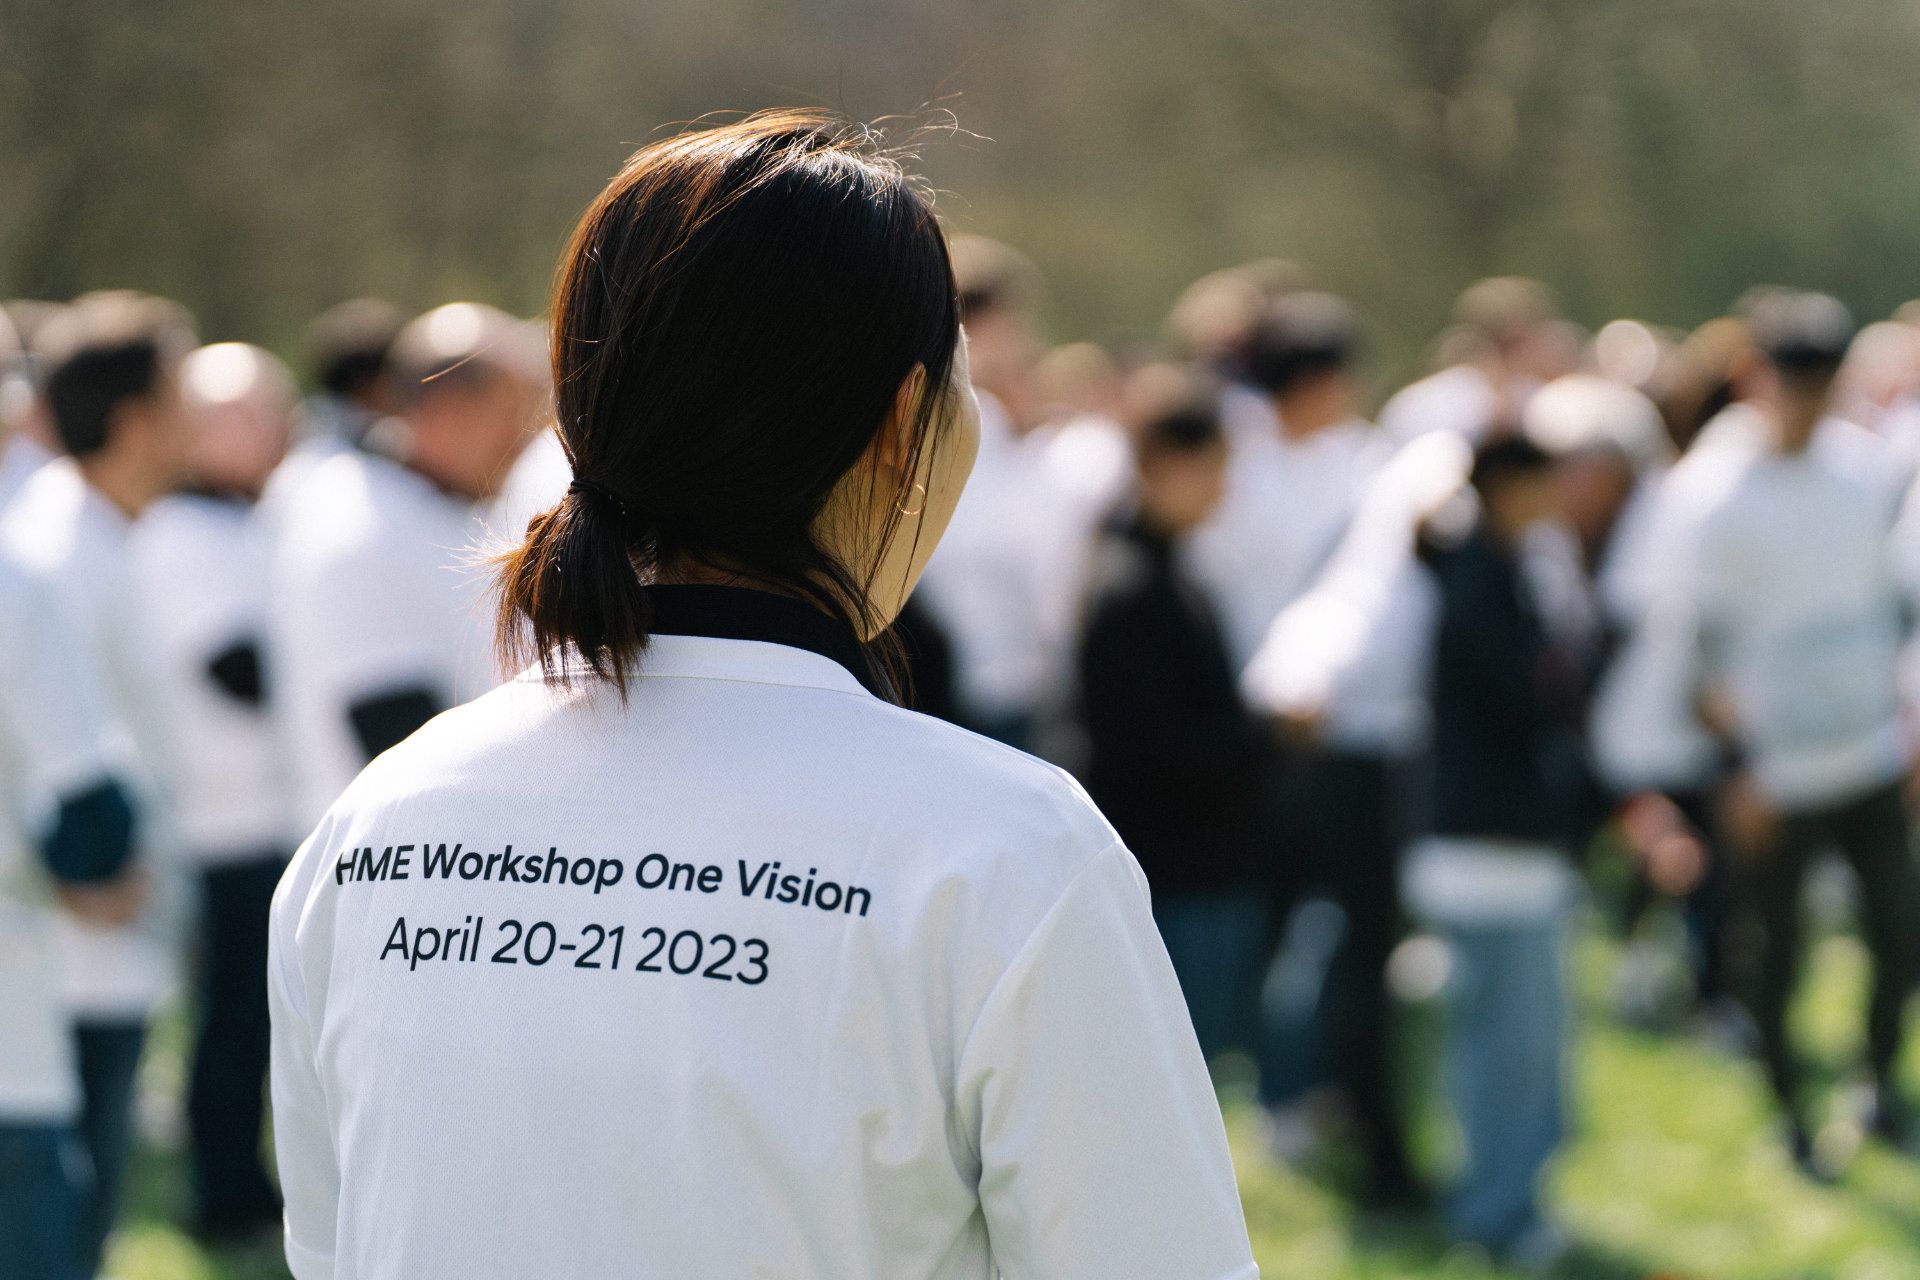 A photographer from Aschaffenburg captures a woman wearing a shirt labeled "hme workshop one vision april 20-21 2023" as she stands with her back to the camera, facing a group of people.